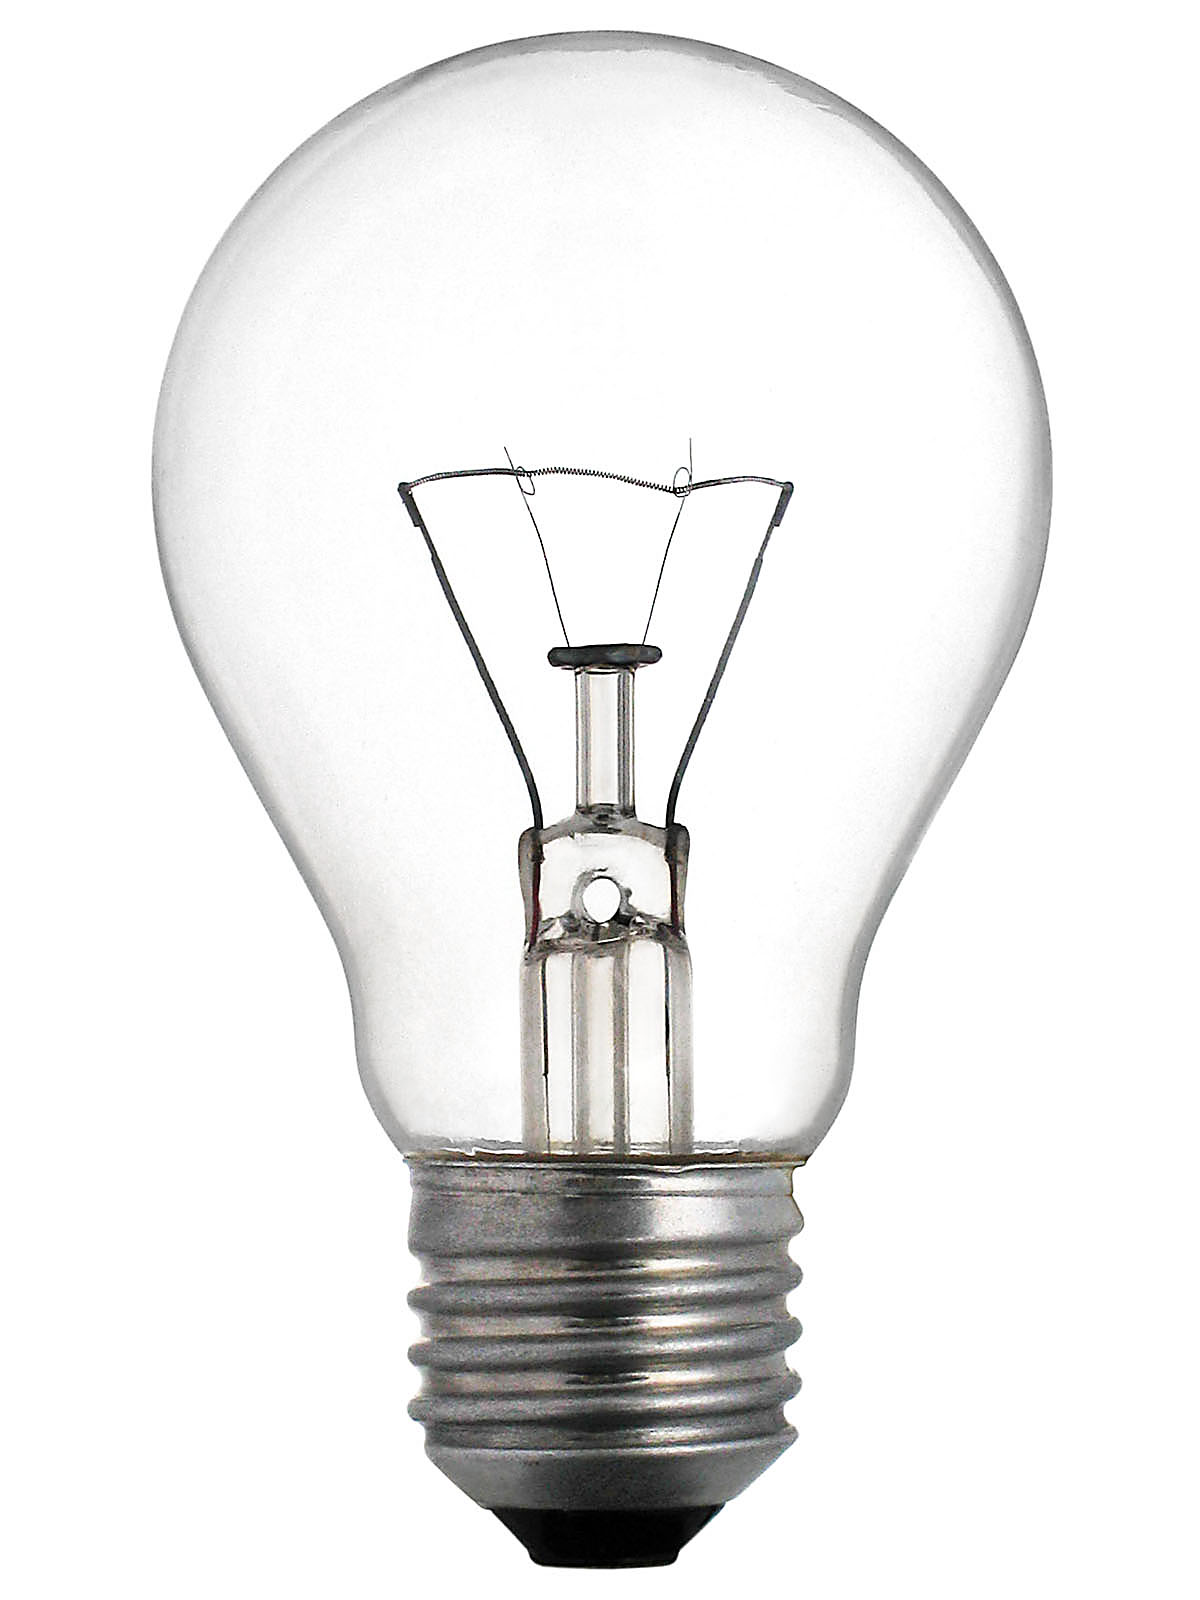 Why We Ban Incandescent Light Bulb?